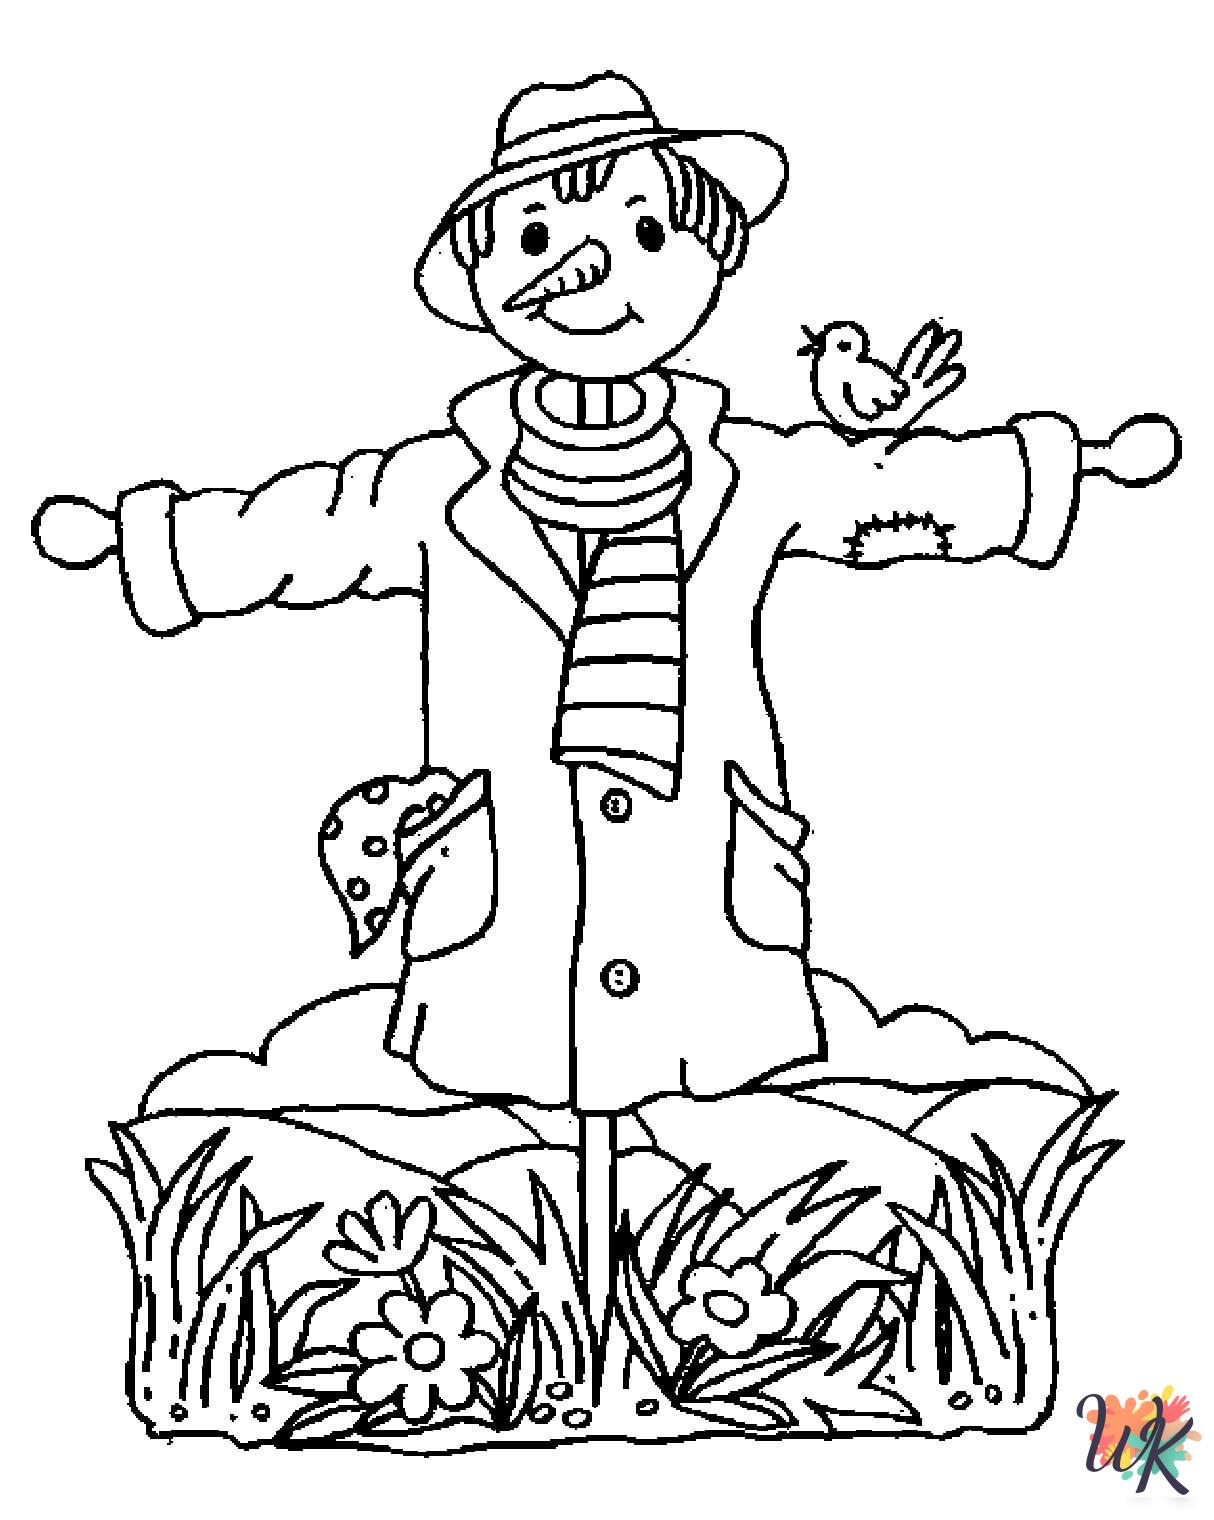 Scarecrow coloring book pages